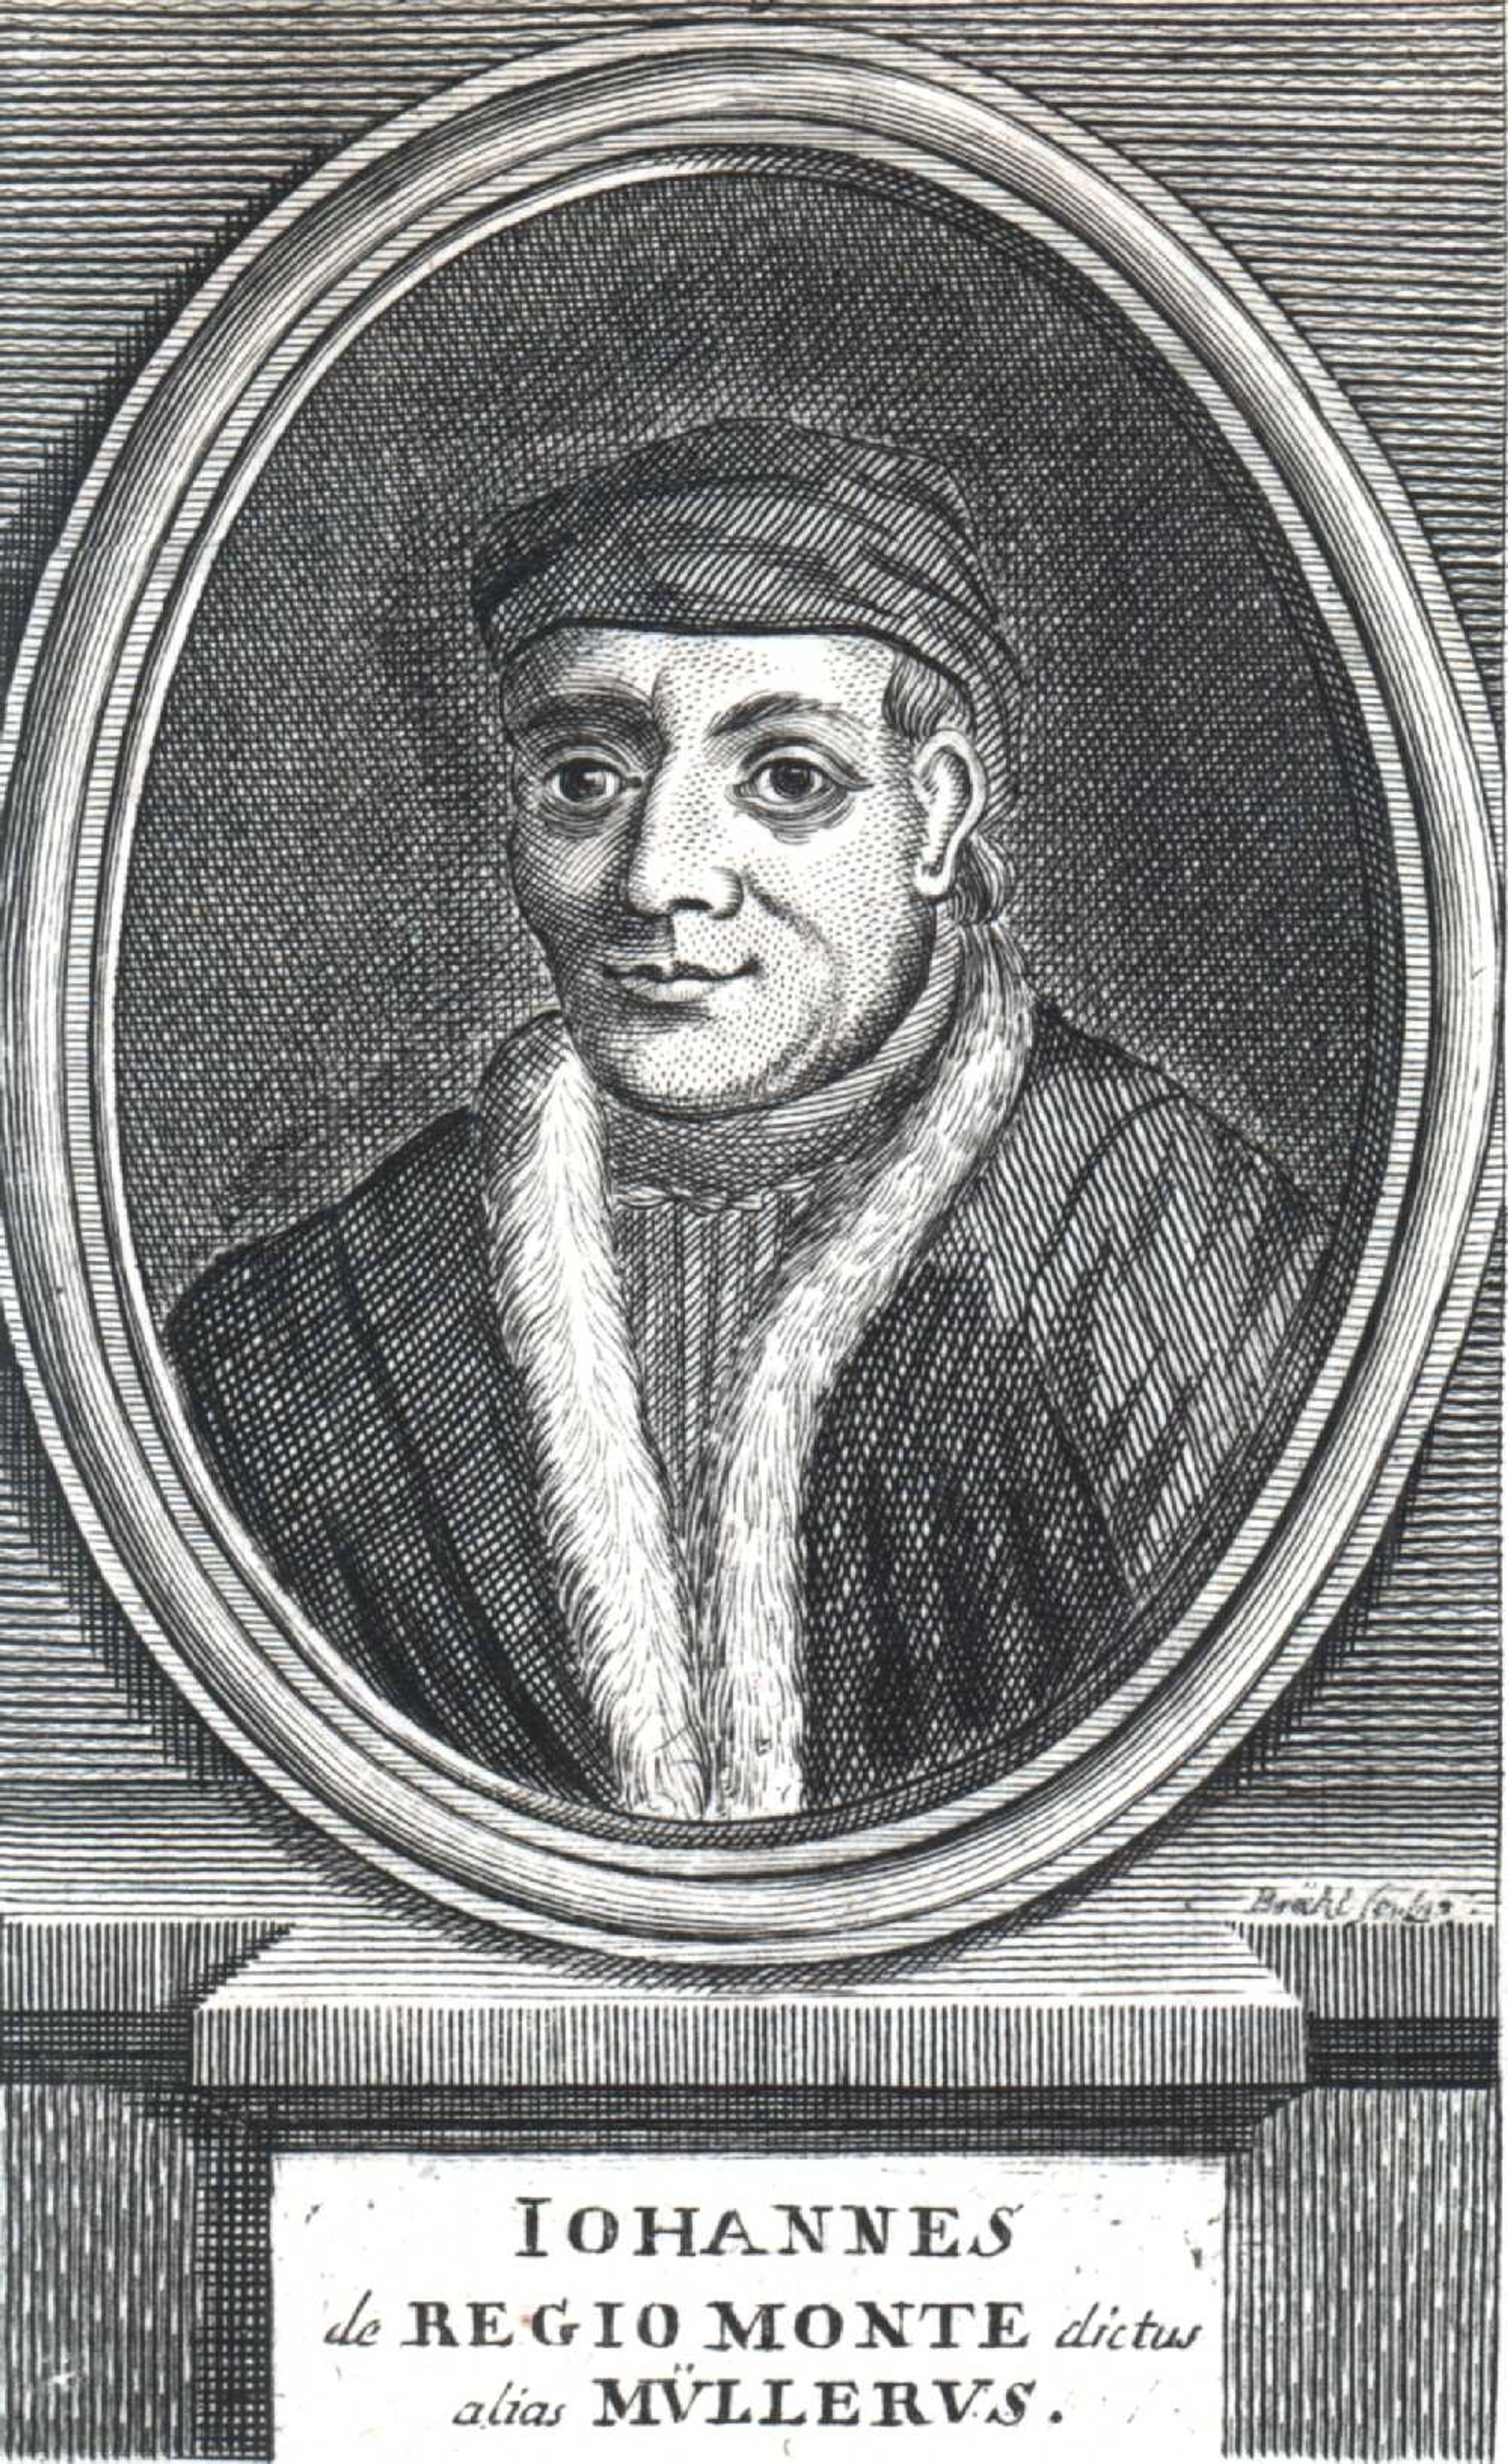 Black and white portrait in a frame of Johannes Regiomontanus, a man wearing a dark robe and hat. 